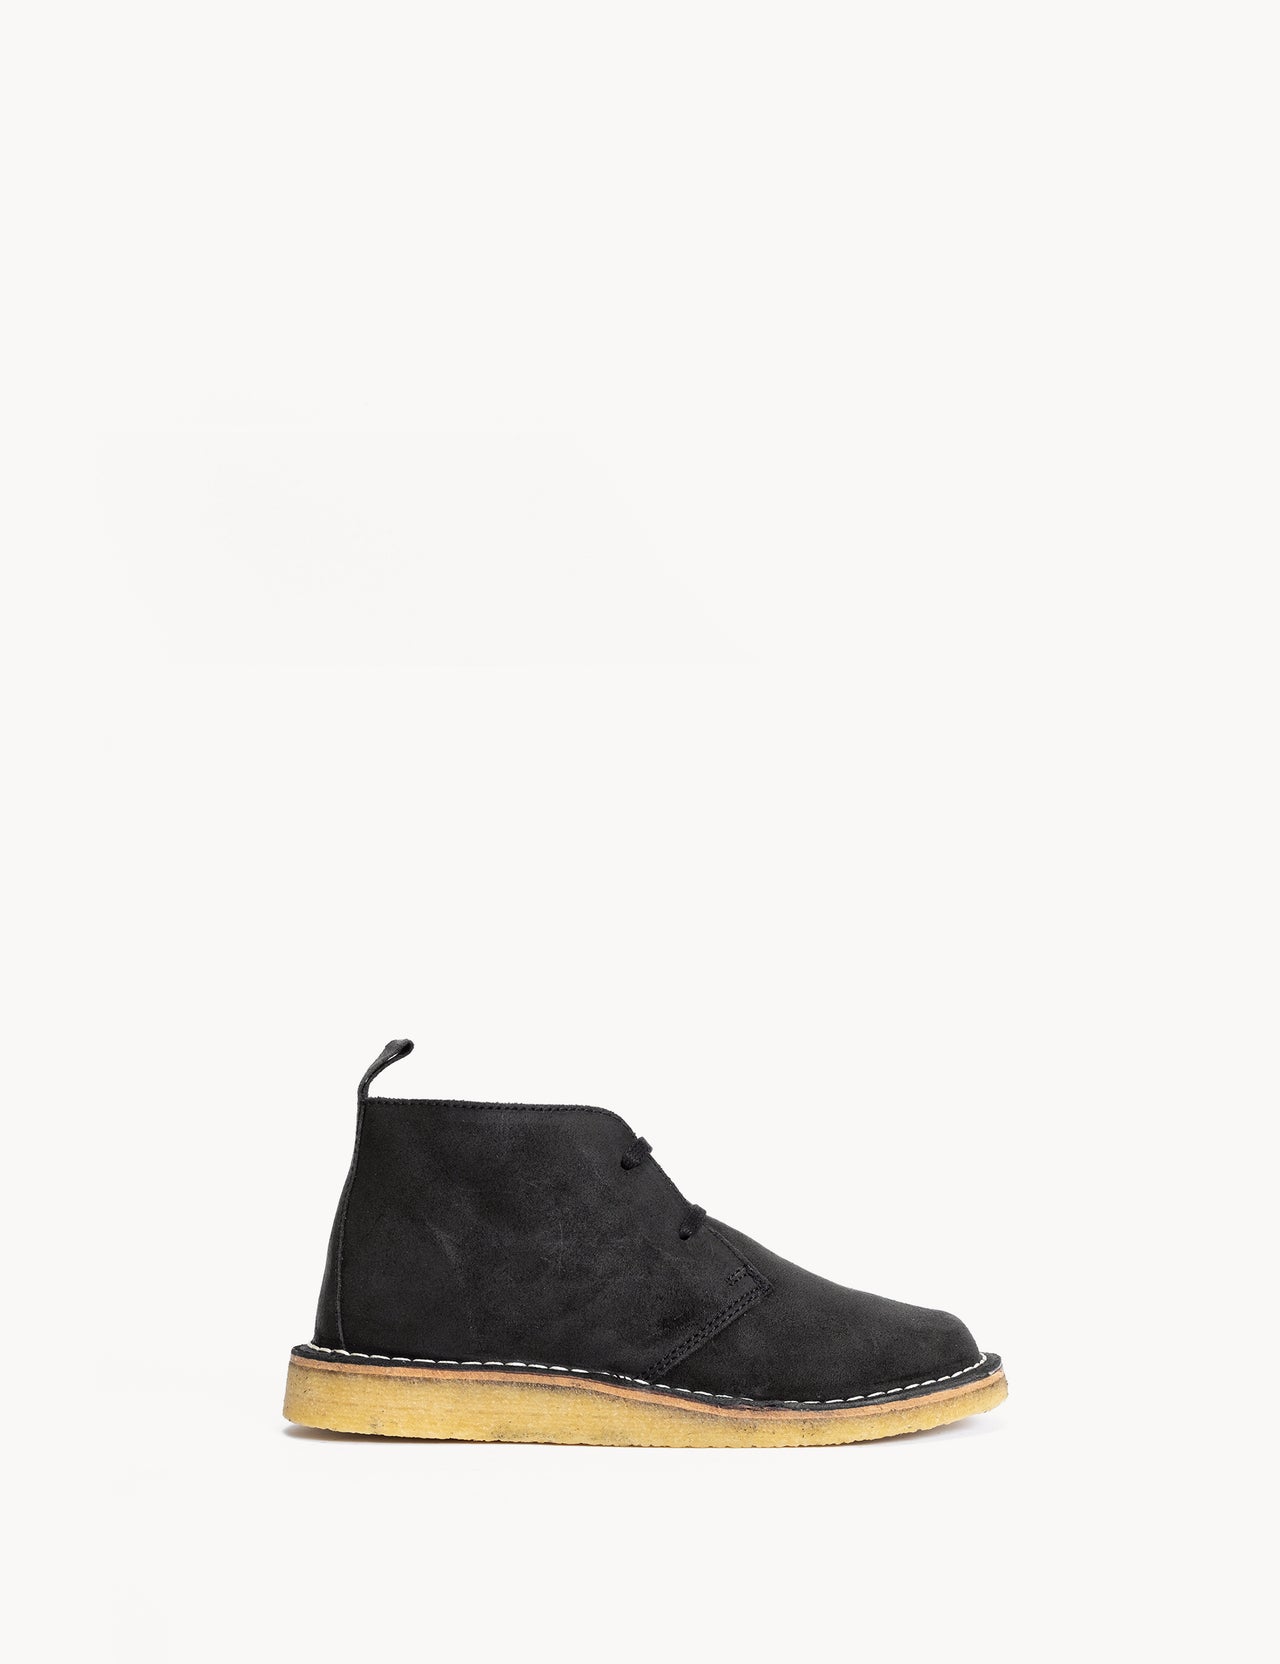 Silja In Black Waxed Suede With a Crepe Sole